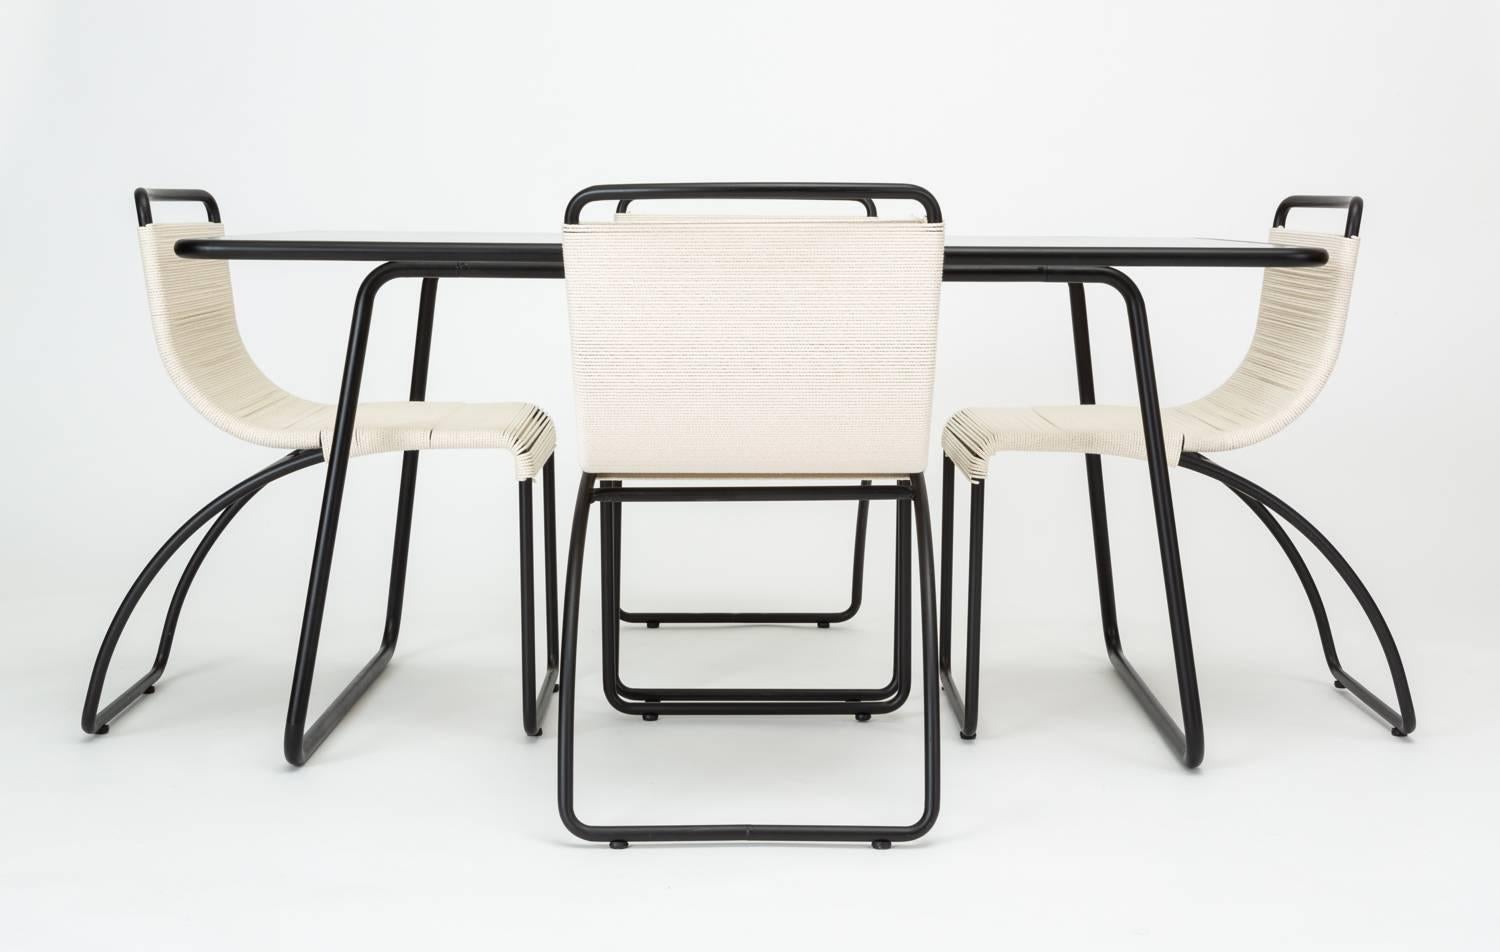 Designed by Hendrik Van Keppel and Taylor Green to suit indoor dining needs as well as outdoor, this patio dining set has four chairs and a rectangular table with a hammered glass top. Each chair has a slightly curved frame of tubular, powder-coated